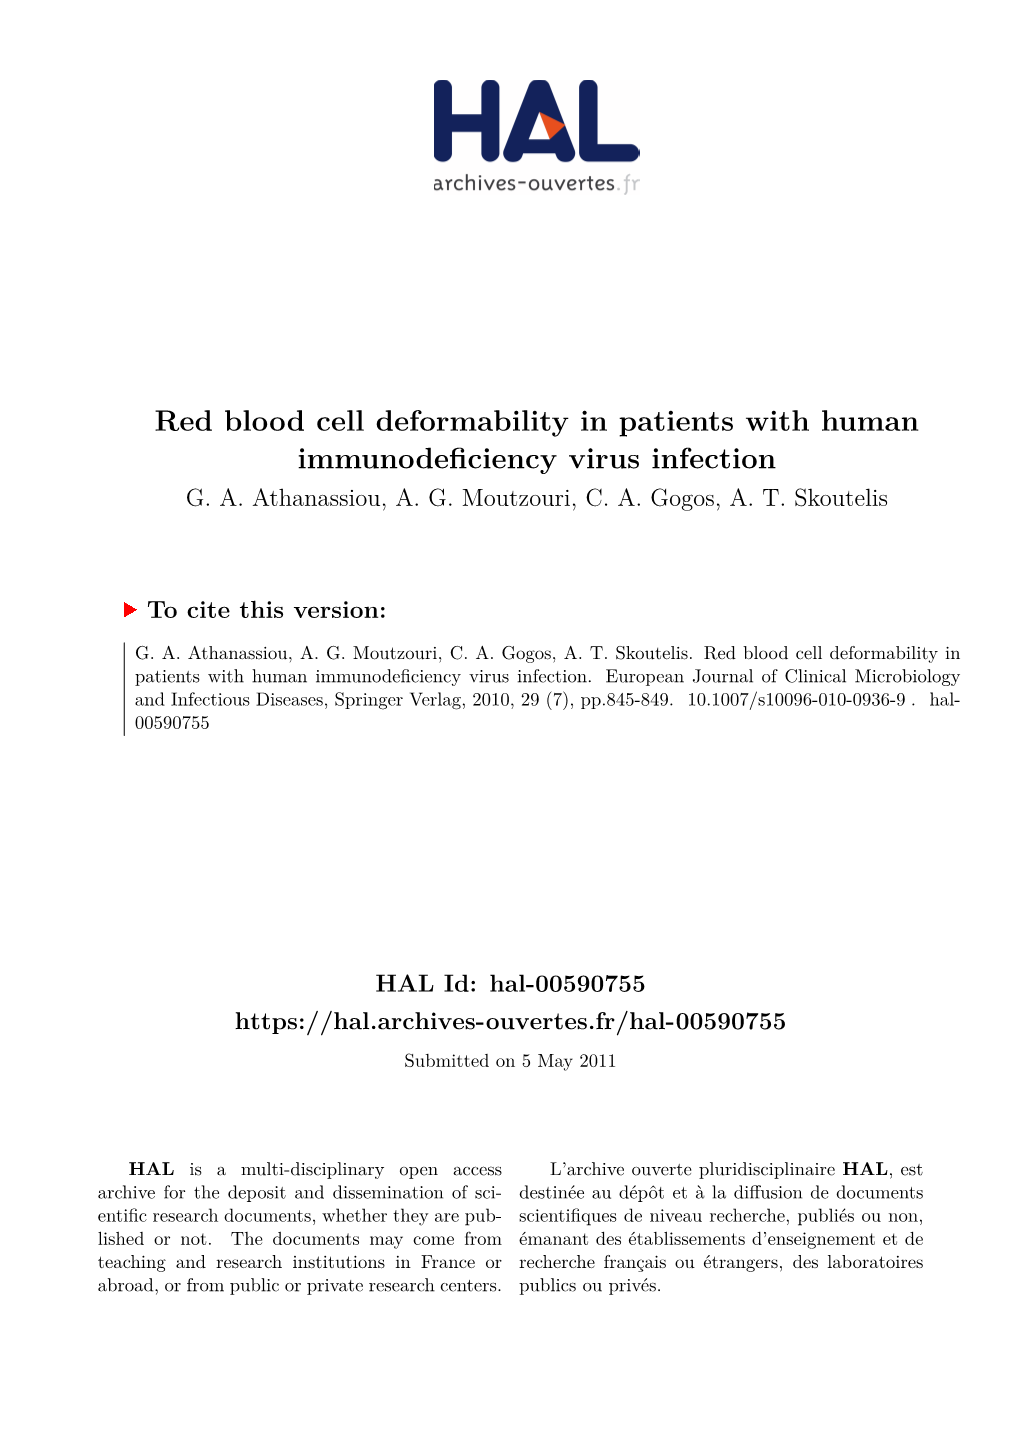 Red Blood Cell Deformability in Patients with Human Immunodeficiency Virus Infection G